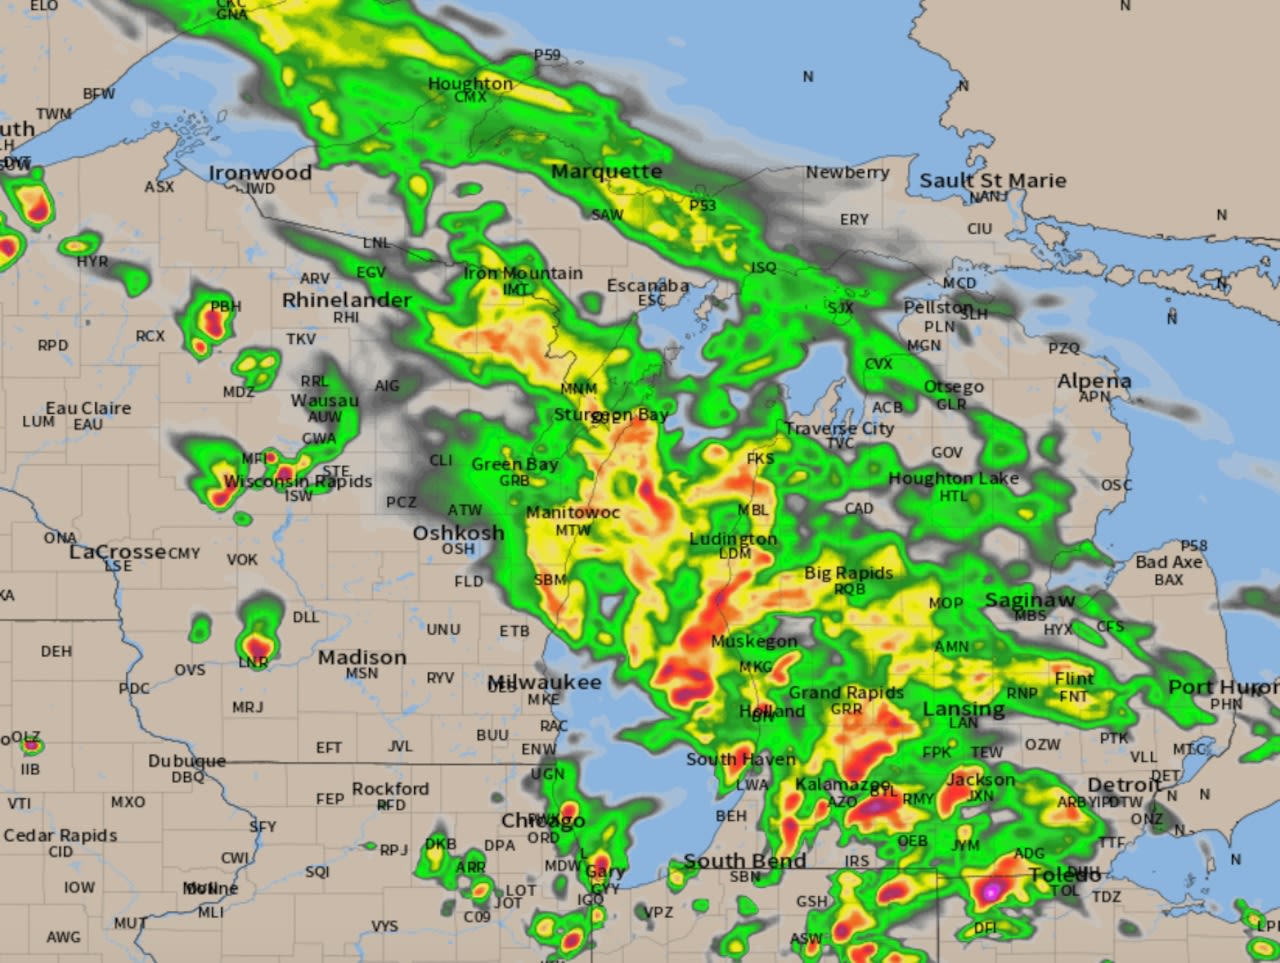 Tornado risk increased for Michigan, models show robust storms Tuesday afternoon